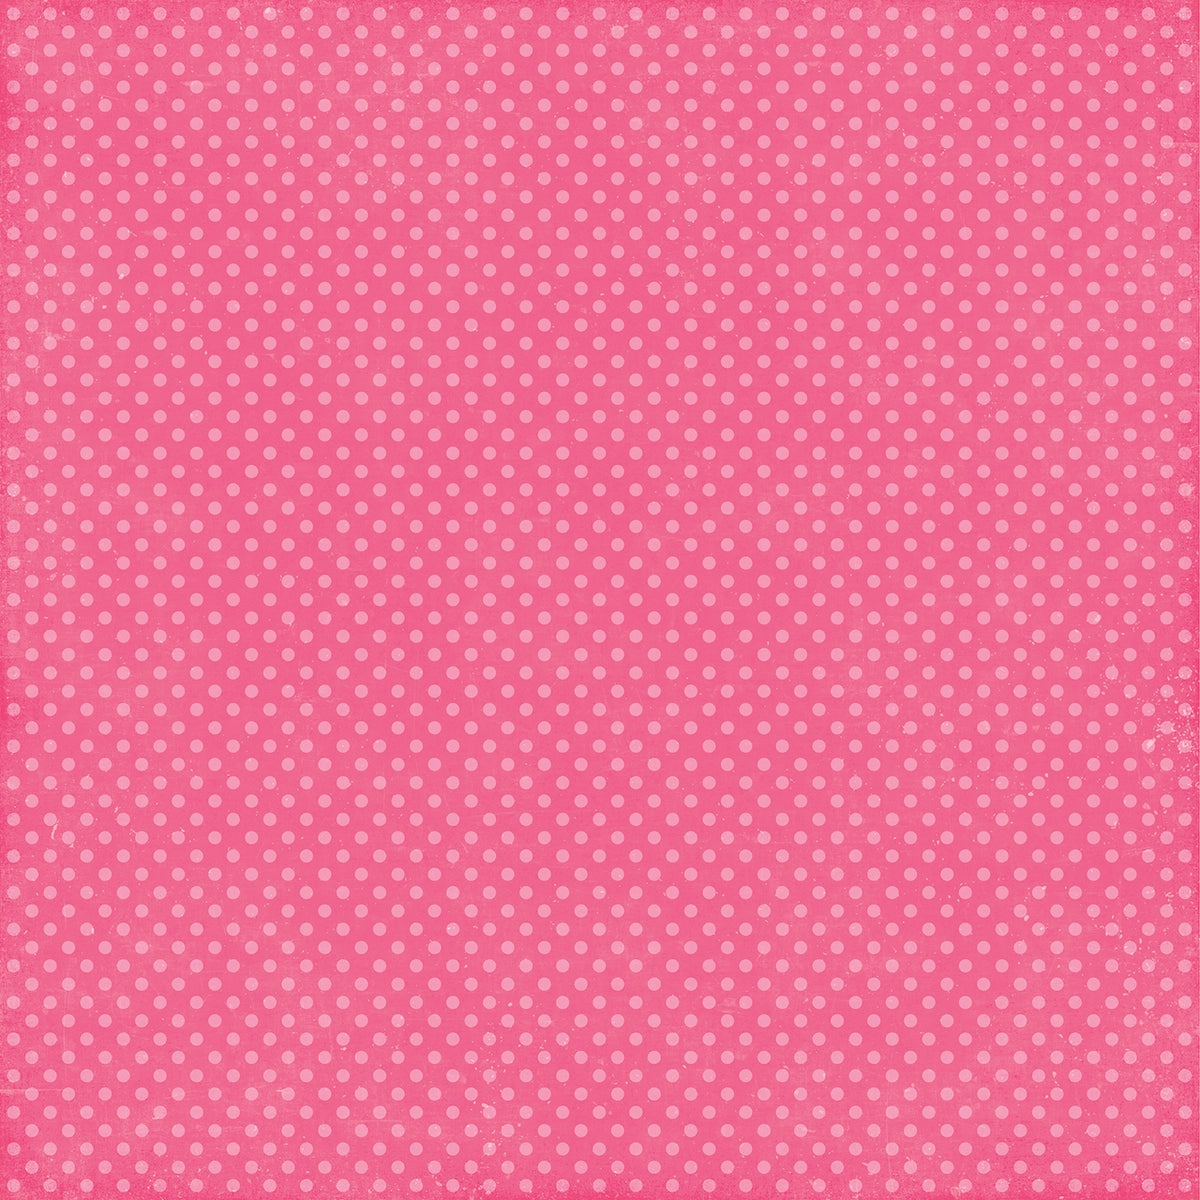 Side B - polka dots in pink on a dark pink background